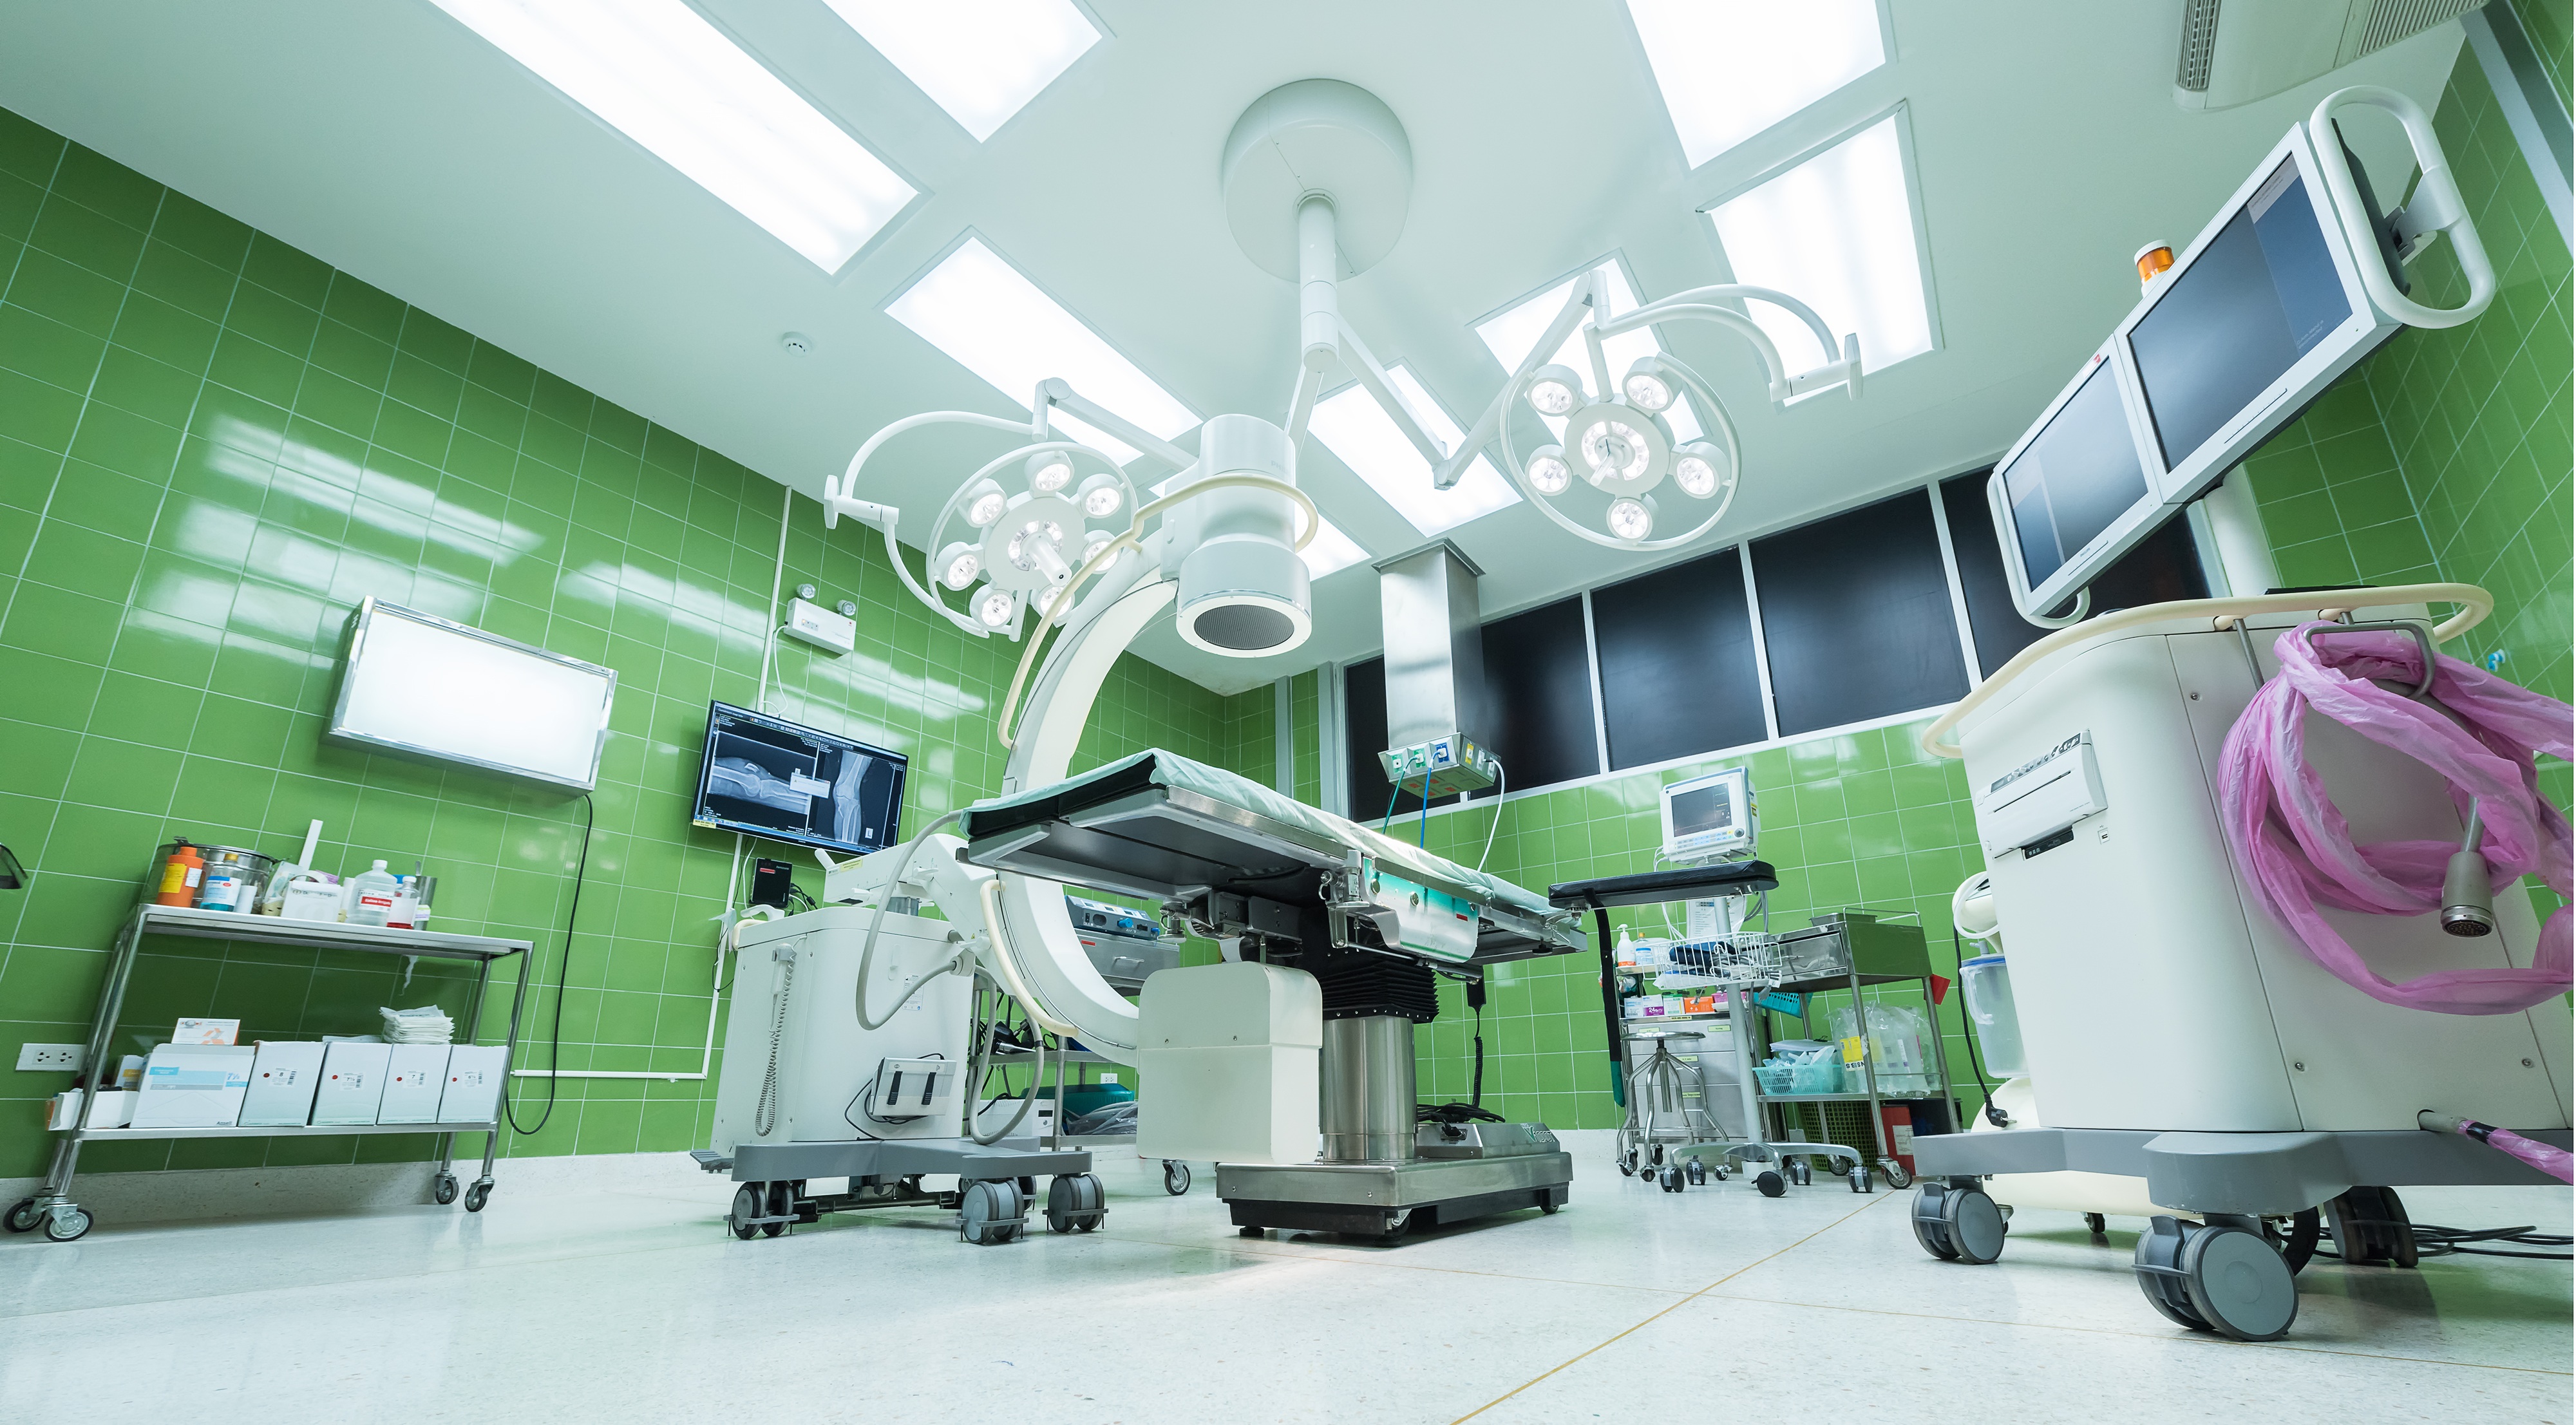 A number of NHS trusts are using technology to track the performance of operating theatres